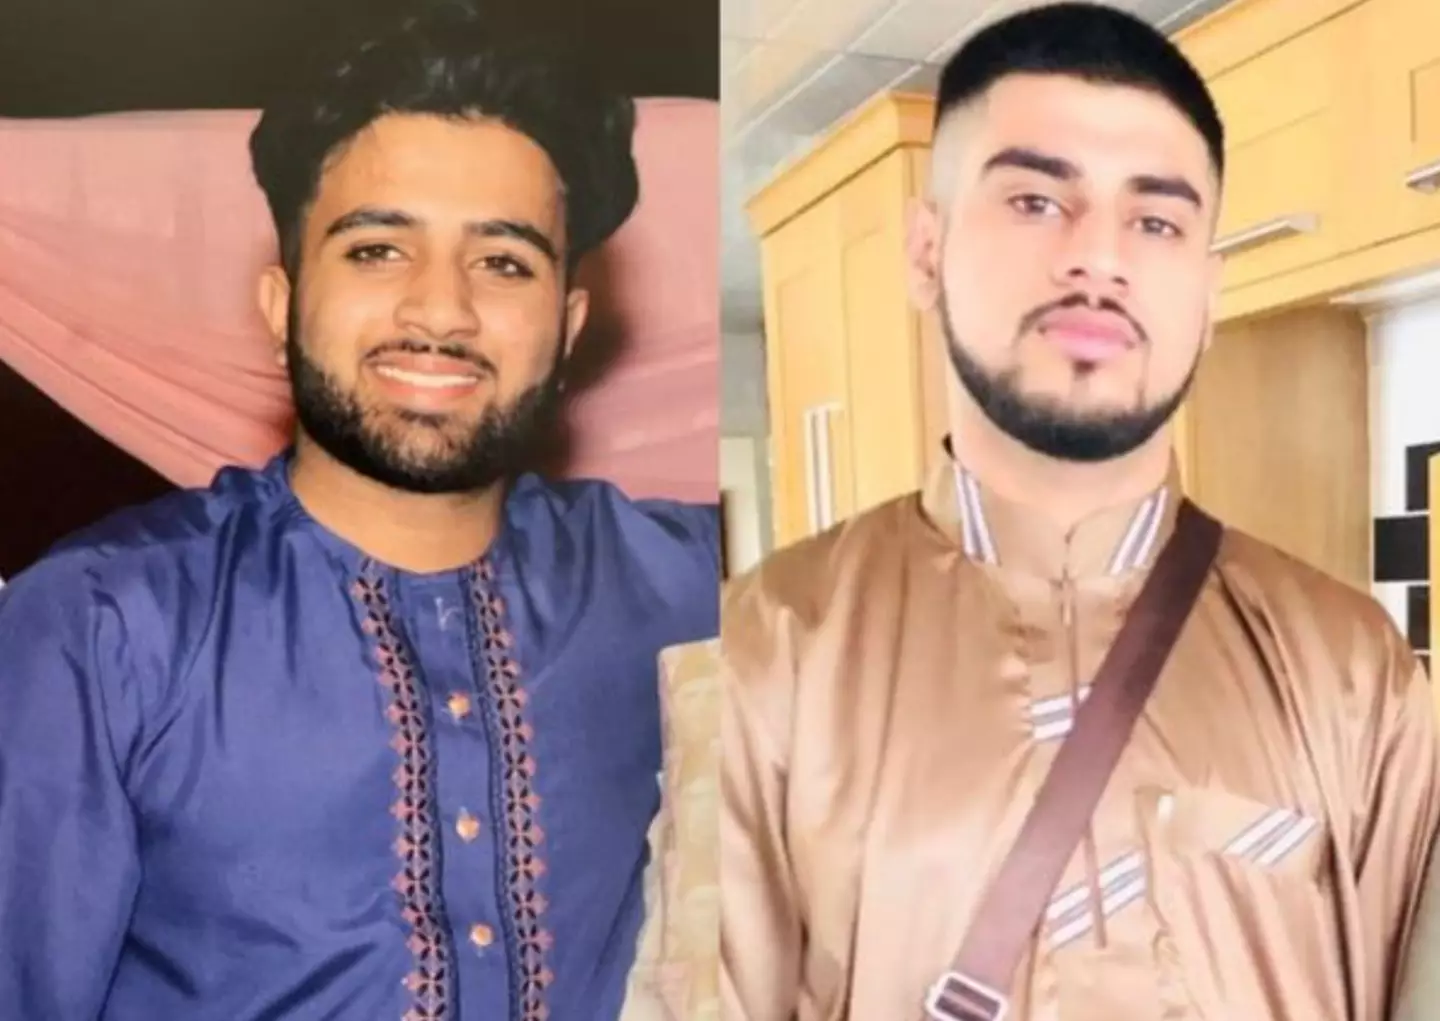 Mohammed Hashim Ijazuddin (left) and Saqib Hussain (right) died after a collision in February.